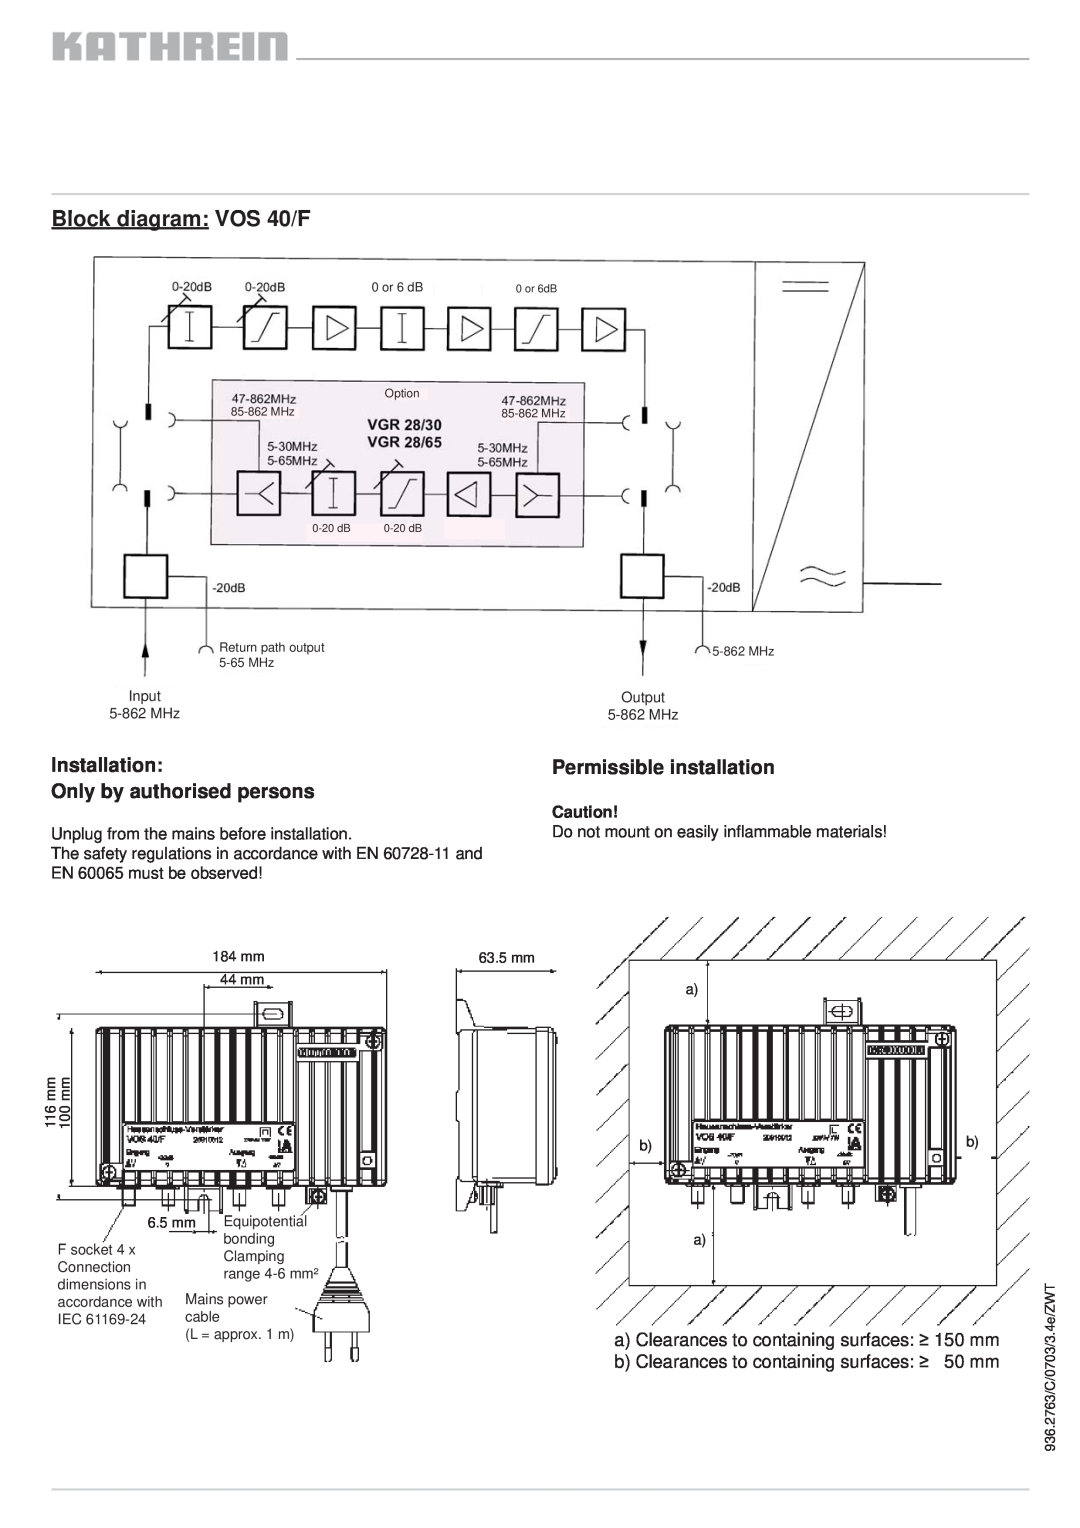 Kathrein VOS 30/F manual Block diagram VOS 40/F, Installation Only by authorised persons, Permissible installation 